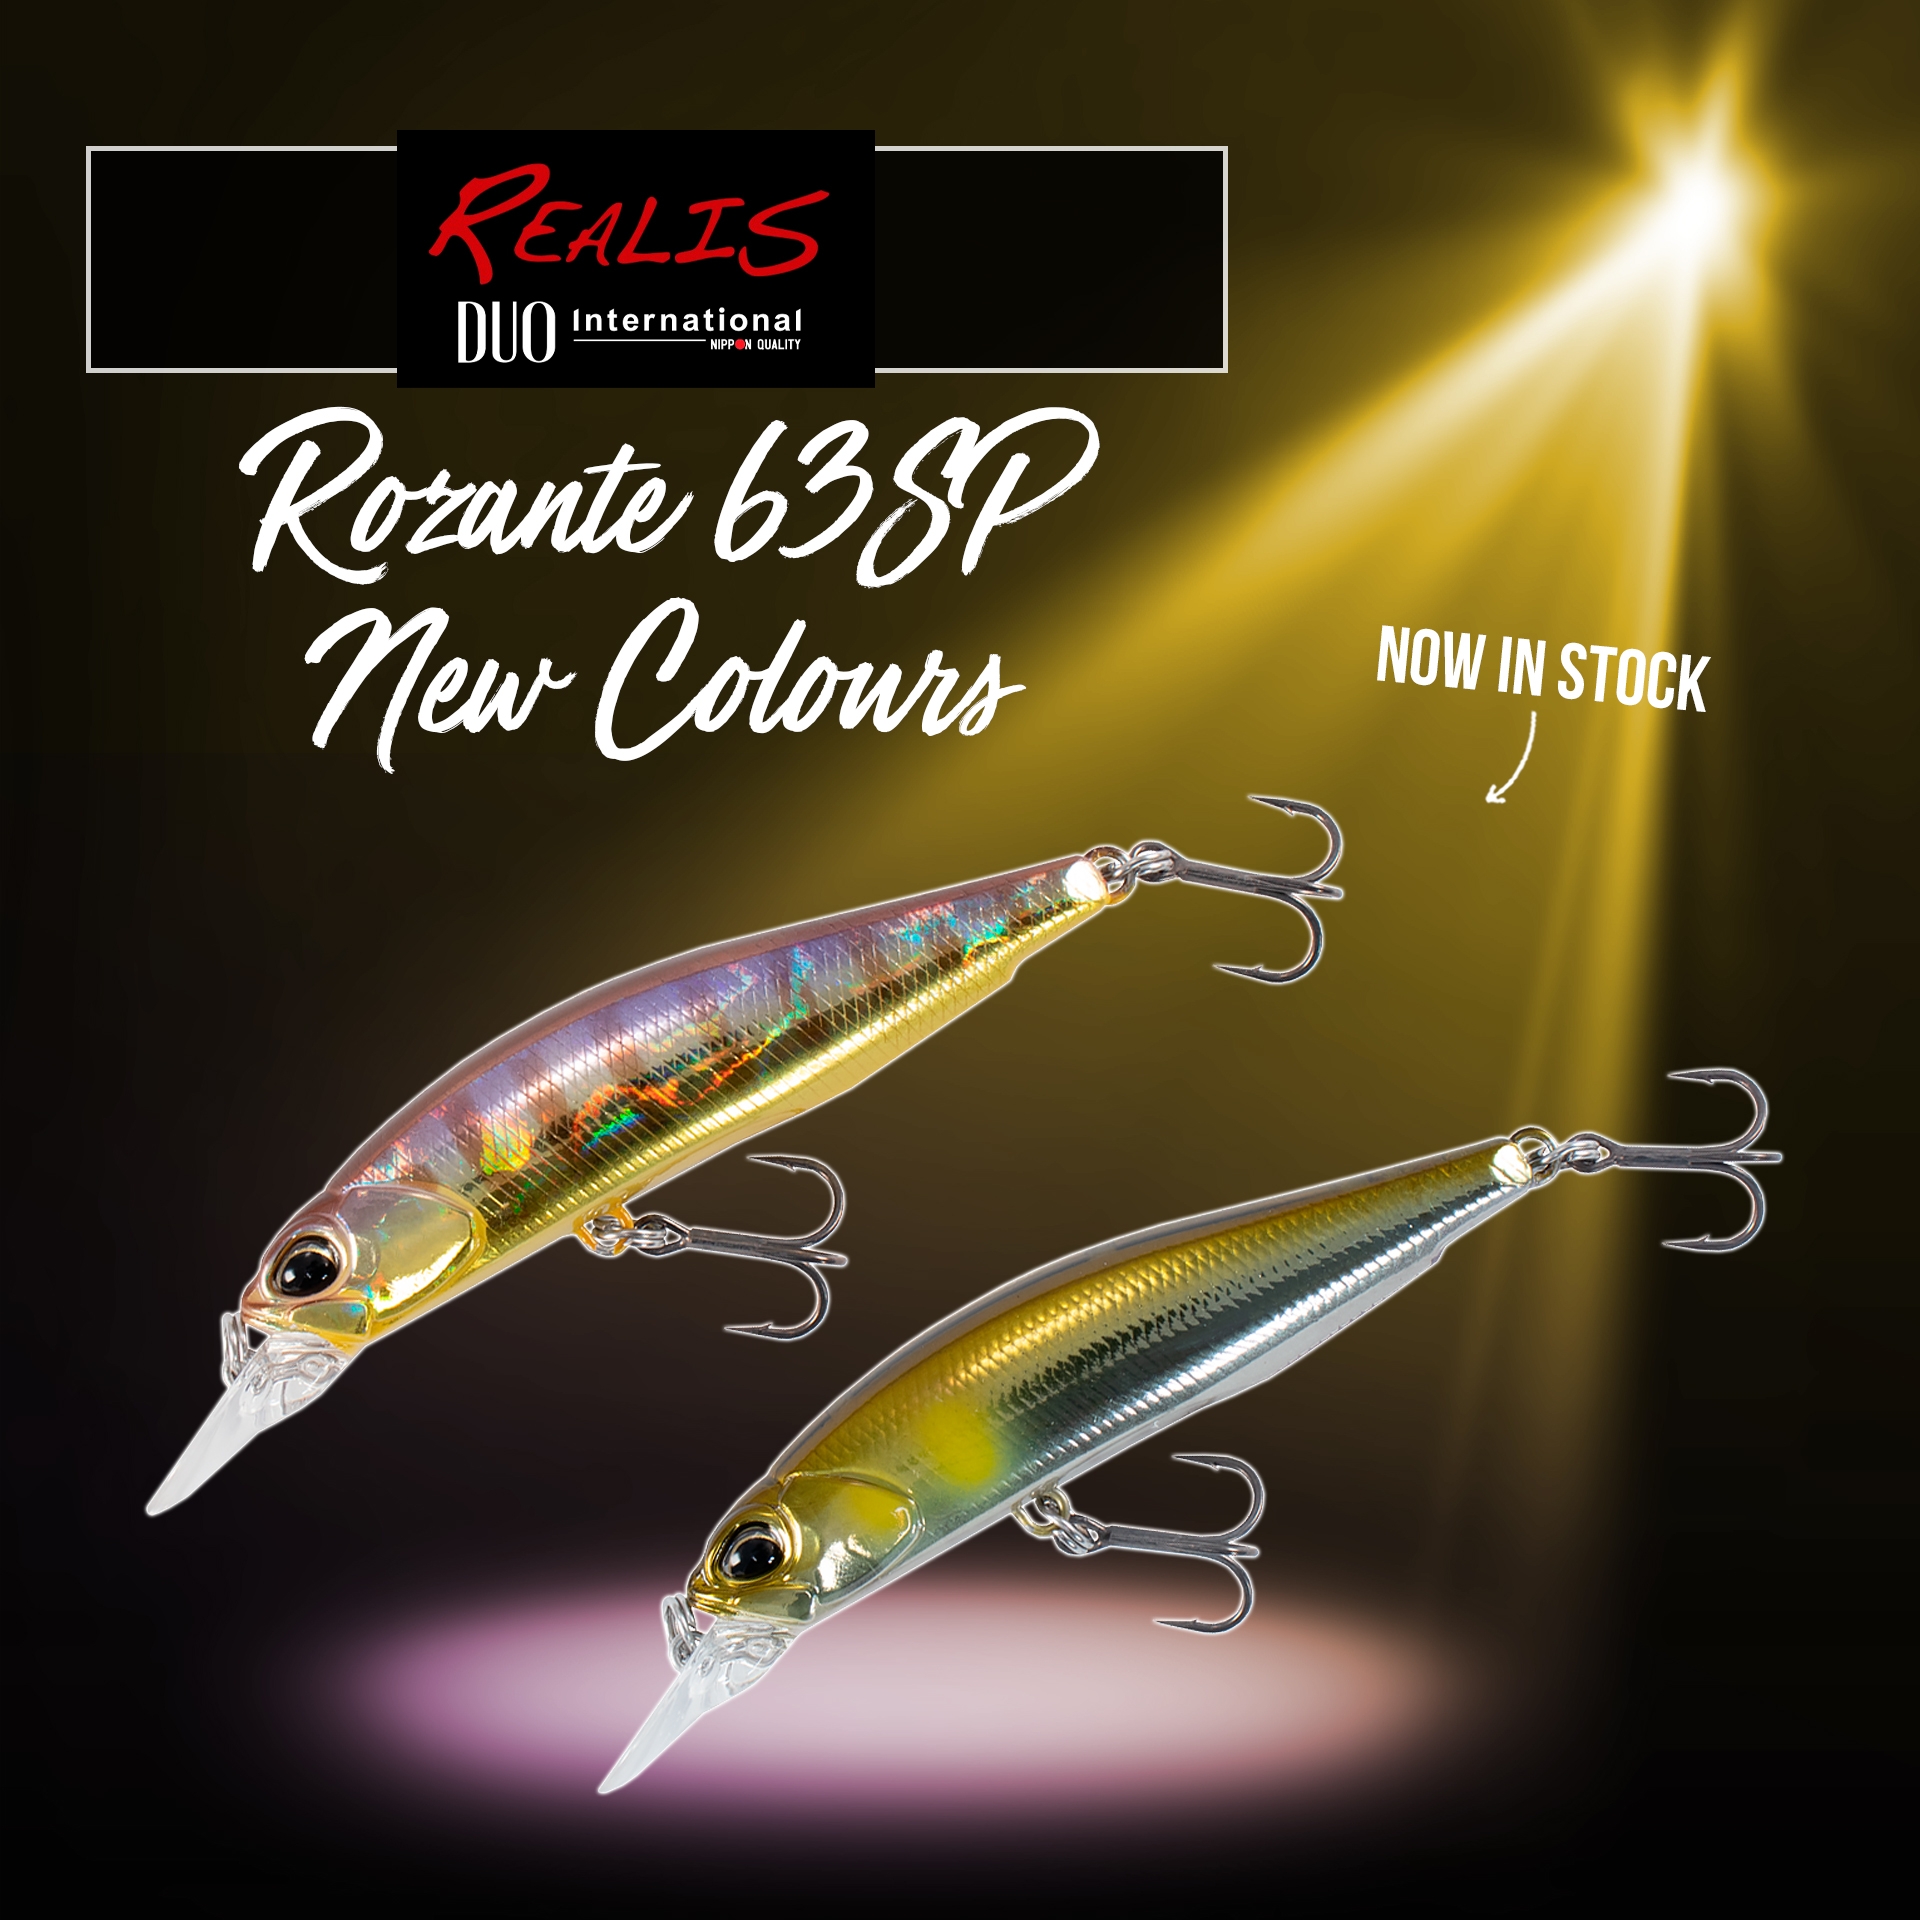 New - DUO REALIS ROZANTE 63SP LURE